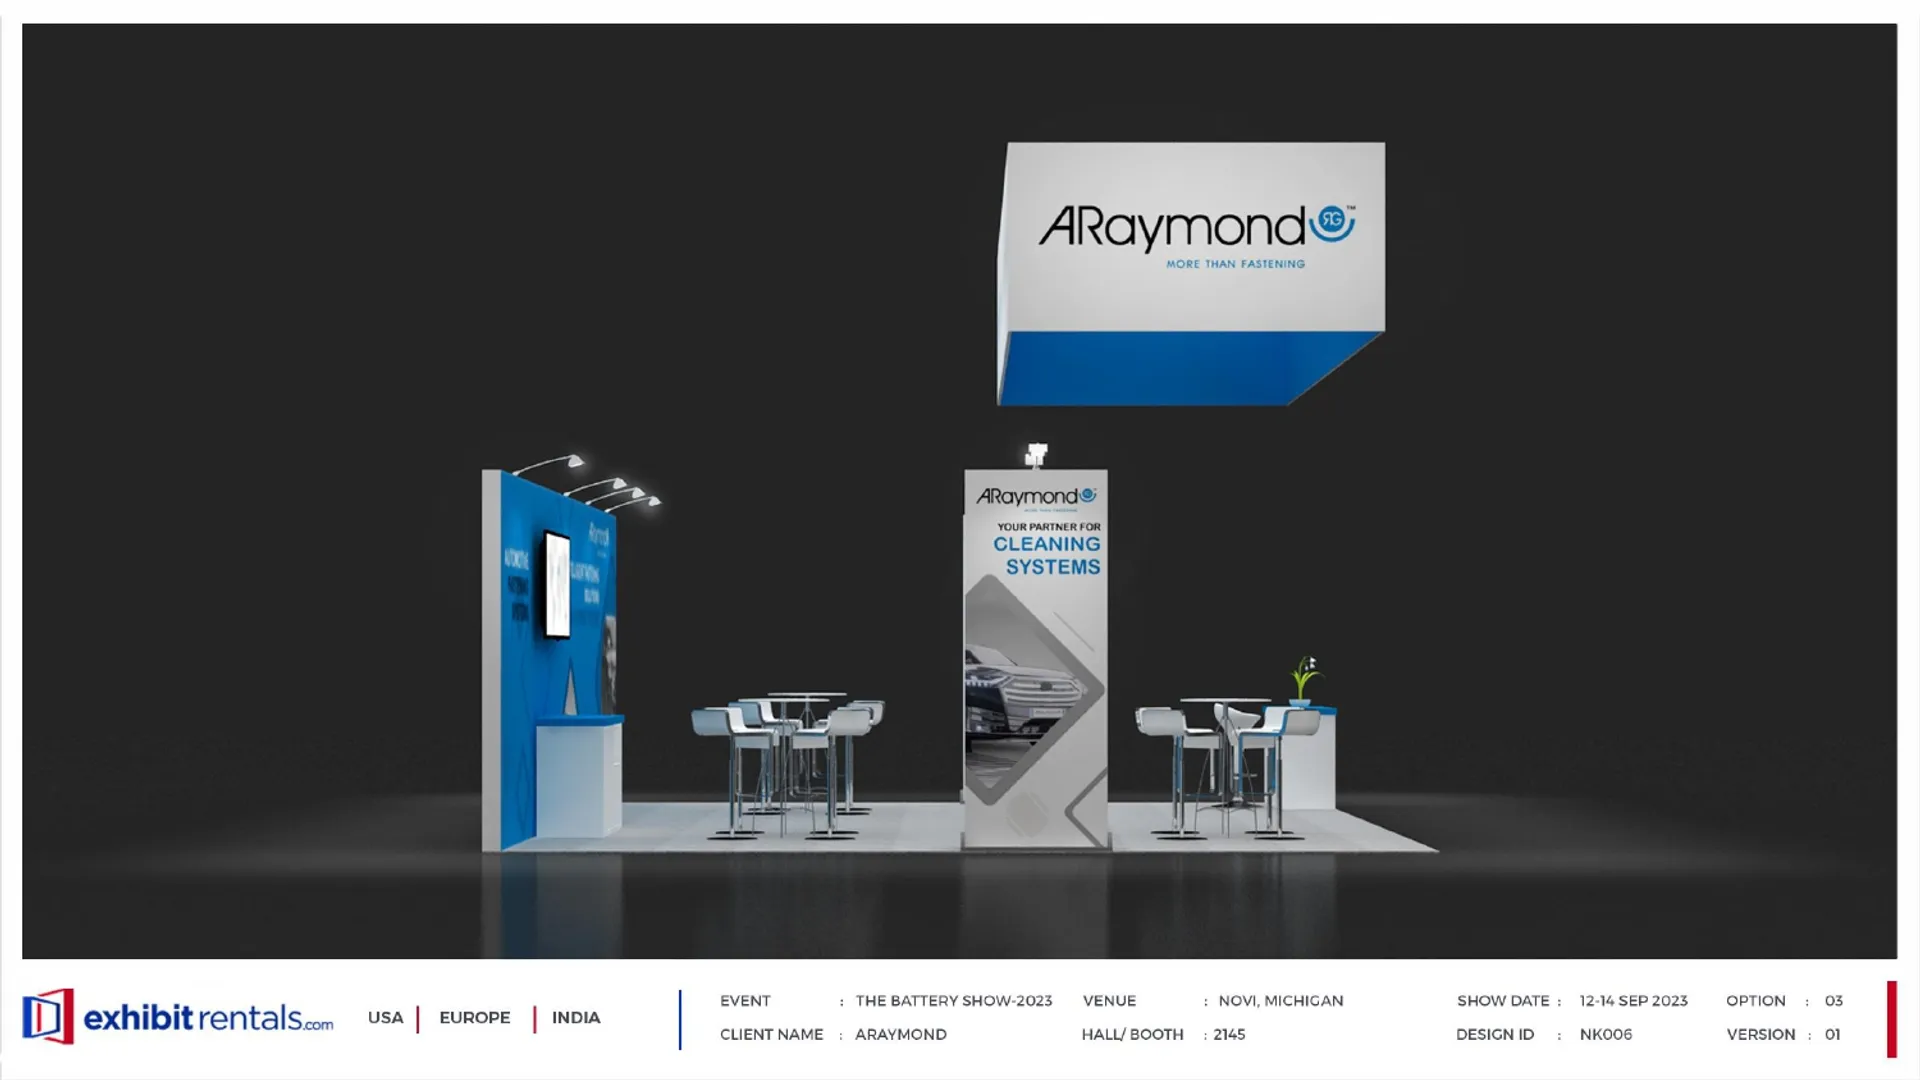 booth-design-projects/Exhibit-Rentals/2024-04-18-20x20-PENINSULA-Project-88/3.1_ARaymond_The Battery Show_ER Design presentation-14_page-0001-0jkw1i.jpg